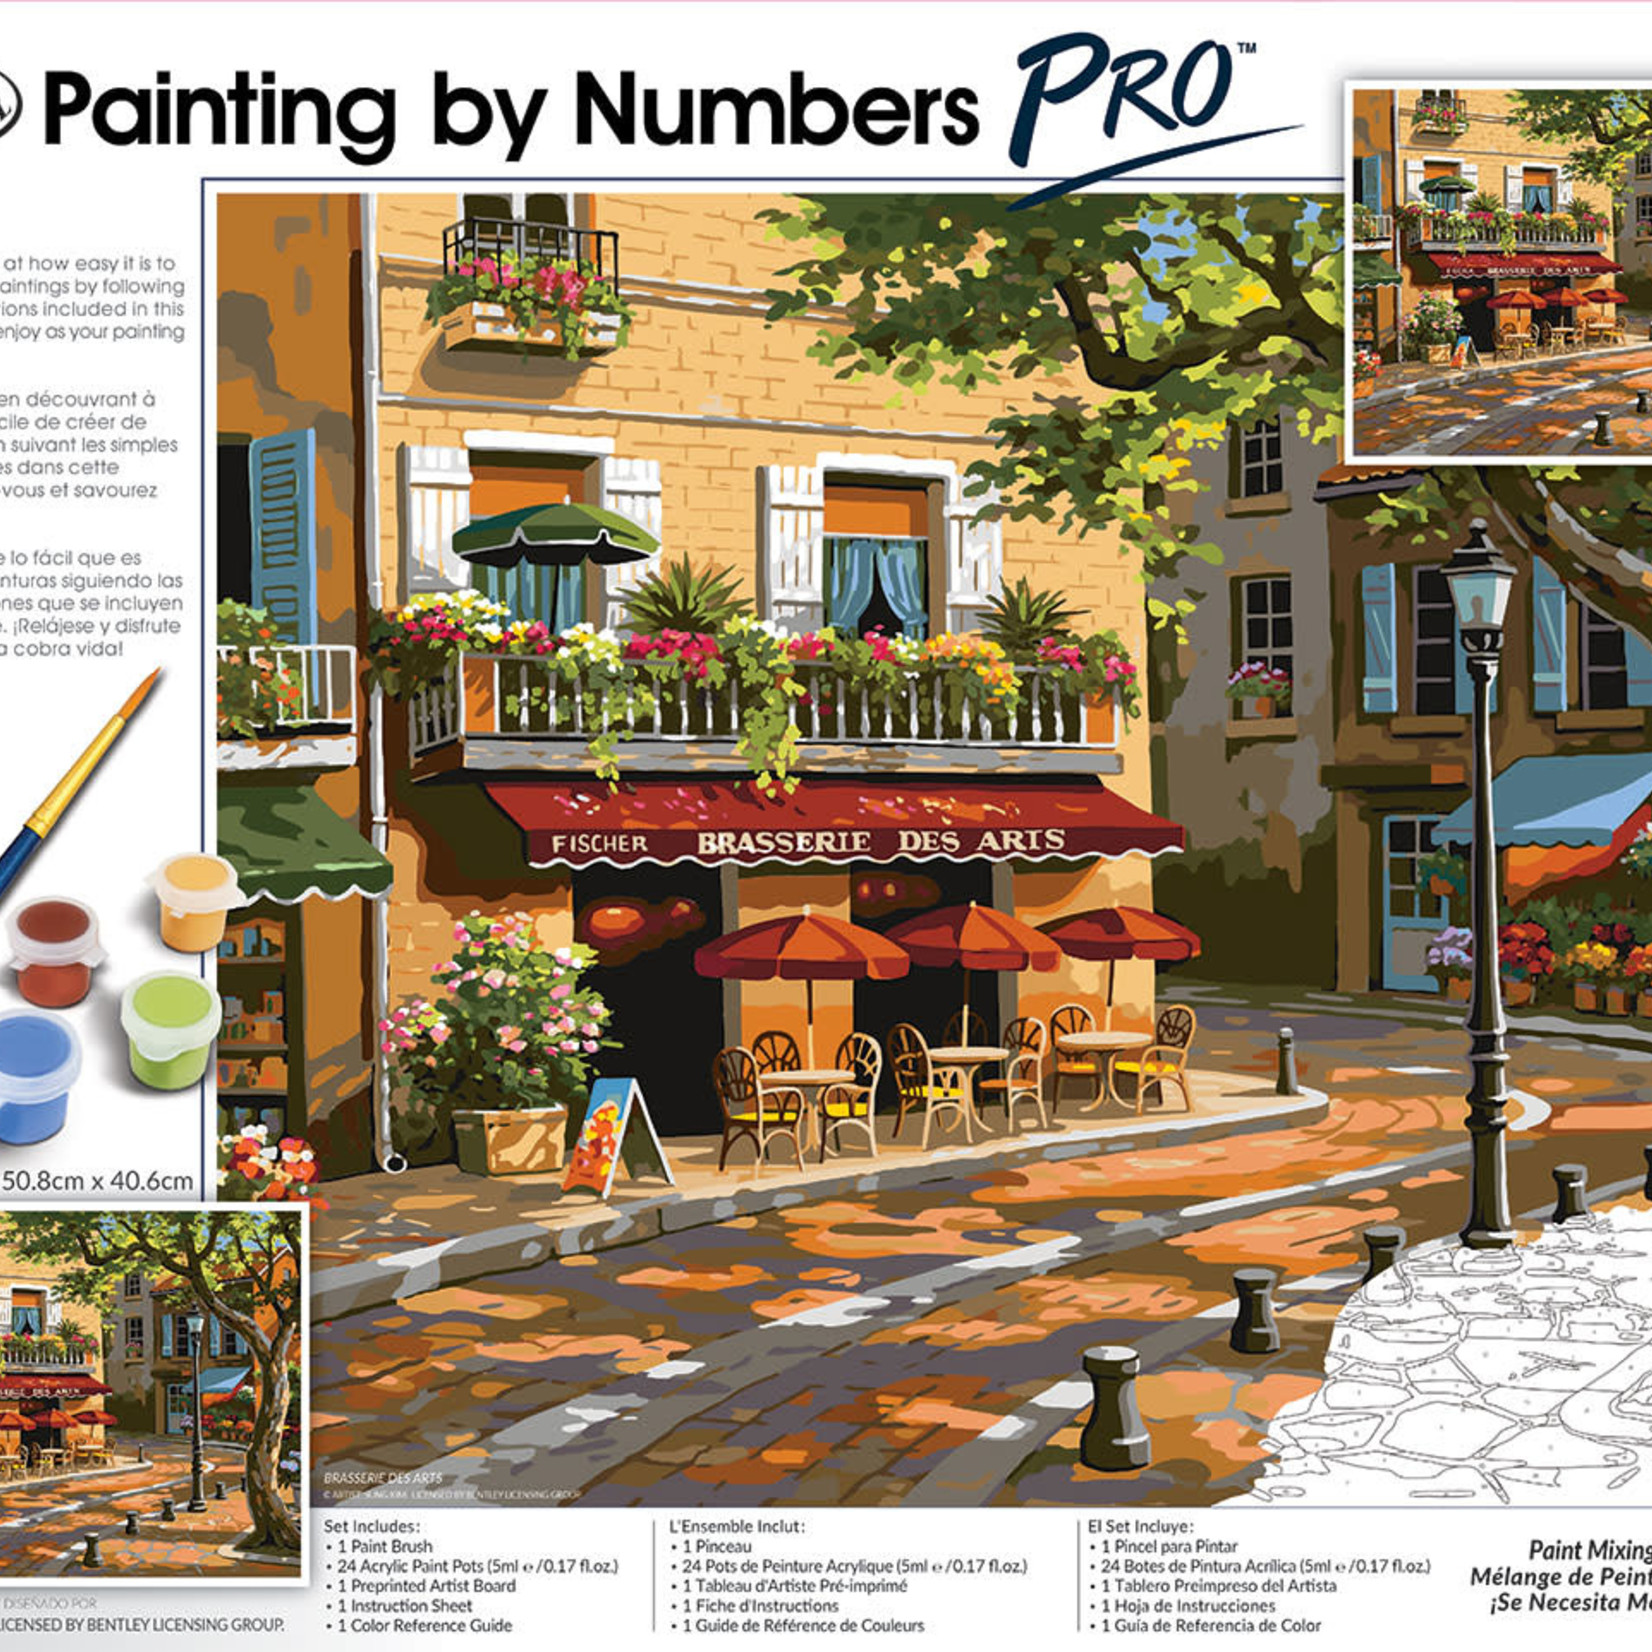 Royal & Langnickel Royal & Langnickel - Painting by Numbers Pro : Brasserie des Arts